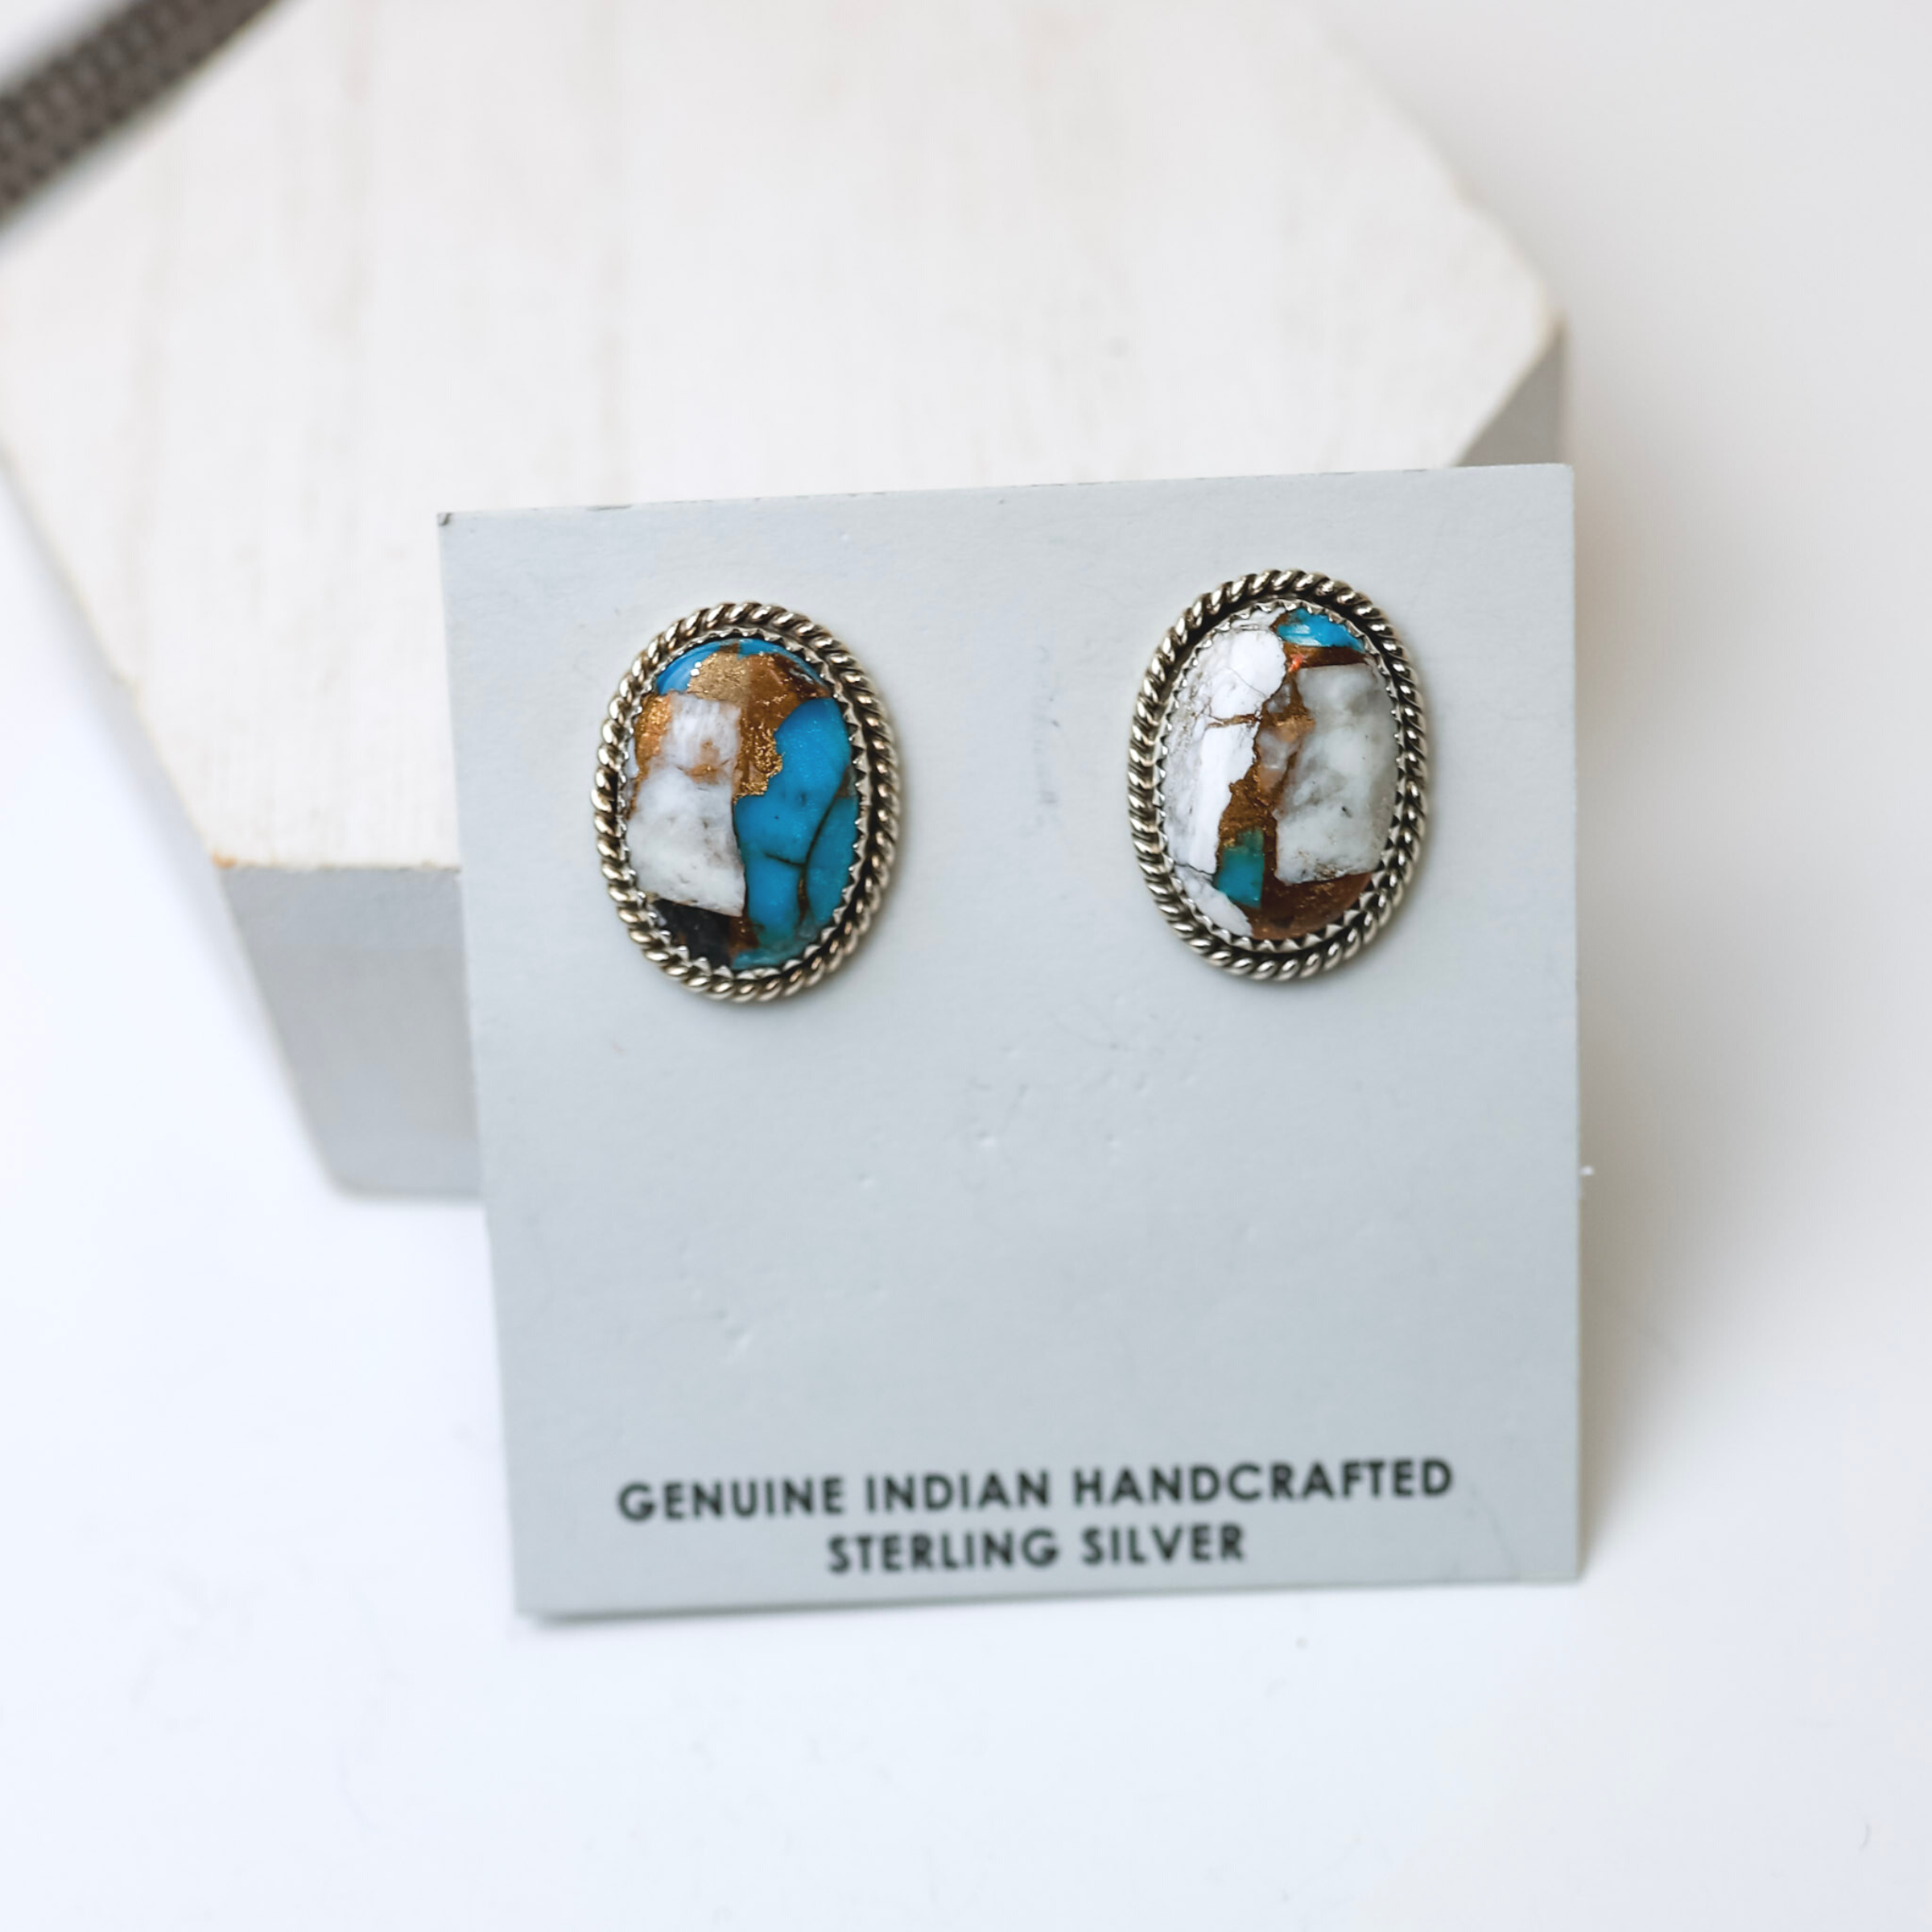 Navajo Handmade Sterling Silver and Remix White Buffalo Turquoise Oval Stud Earrings are centered in the picture, with navajo pearls in the top left corner. All is on a white background. 